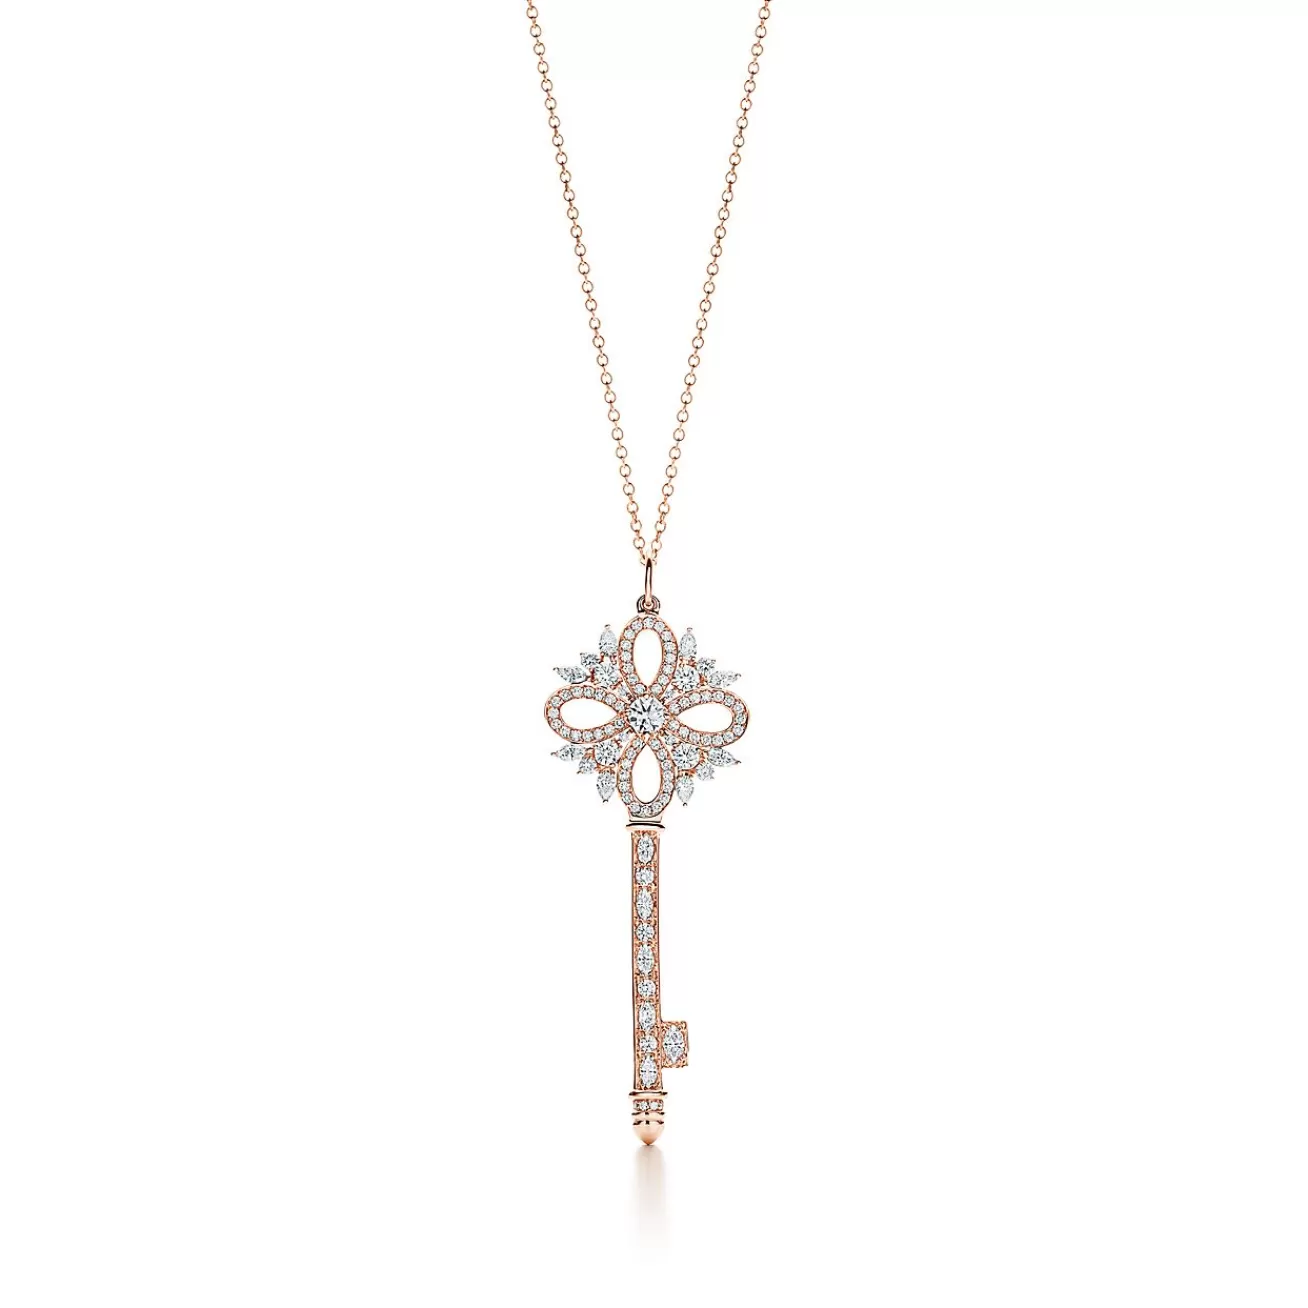 Tiffany & Co. Tiffany Keys Tiffany Victoria® key pendant in rose gold with diamonds, large. | ^ Necklaces & Pendants | Rose Gold Jewelry